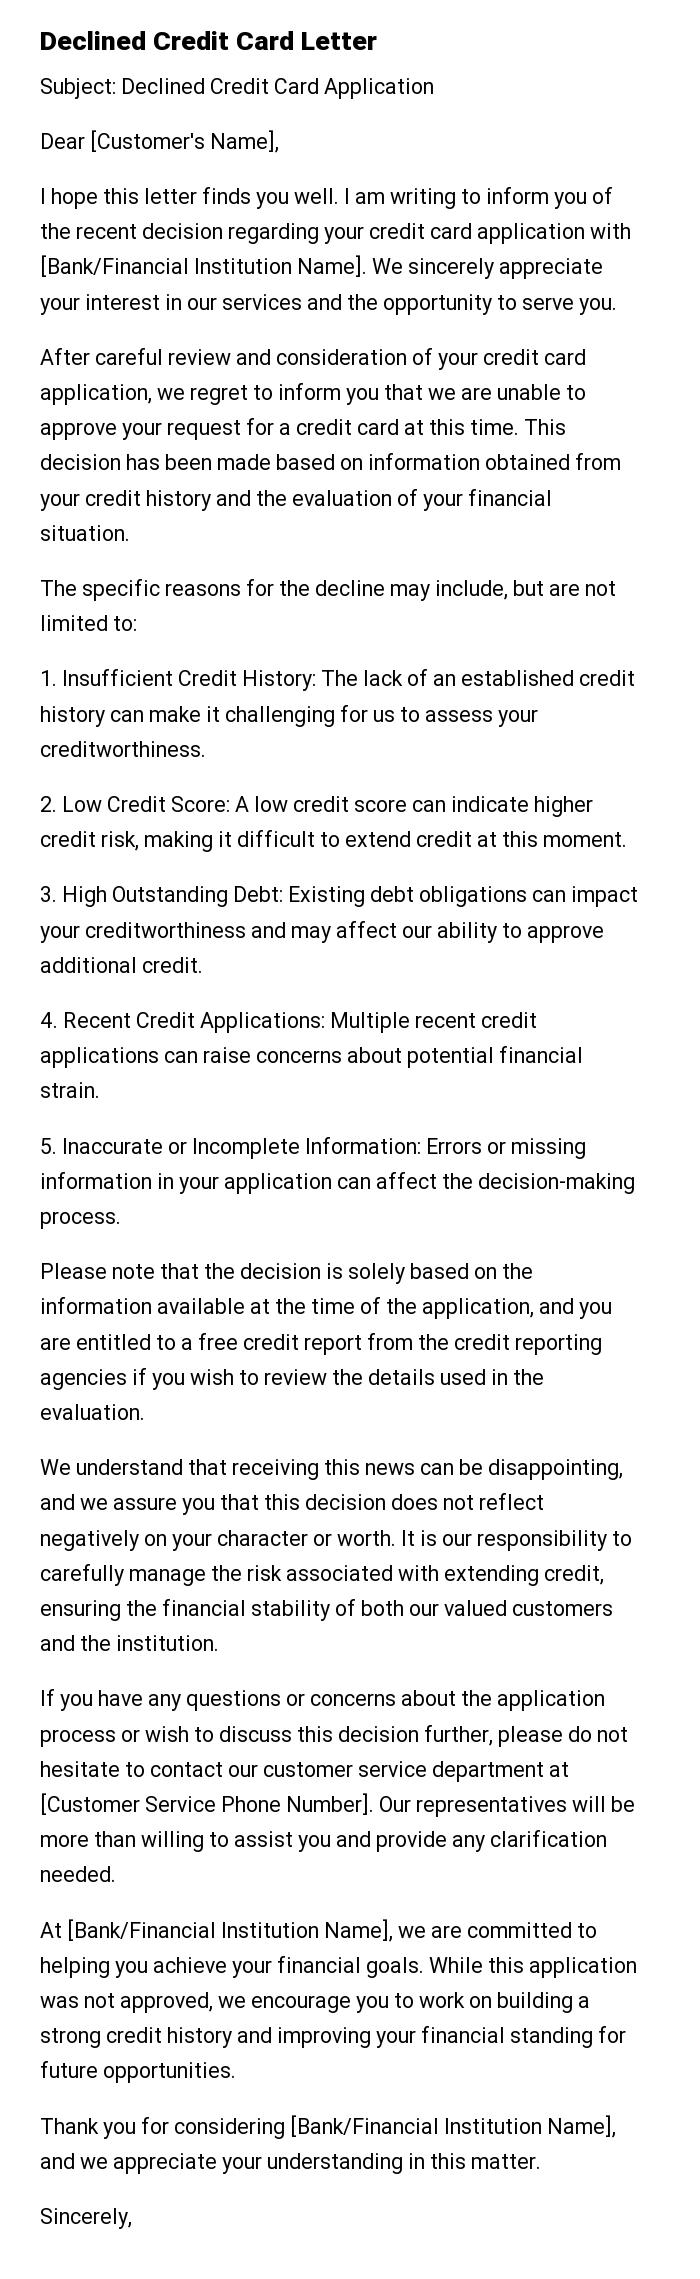 Declined Credit Card Letter